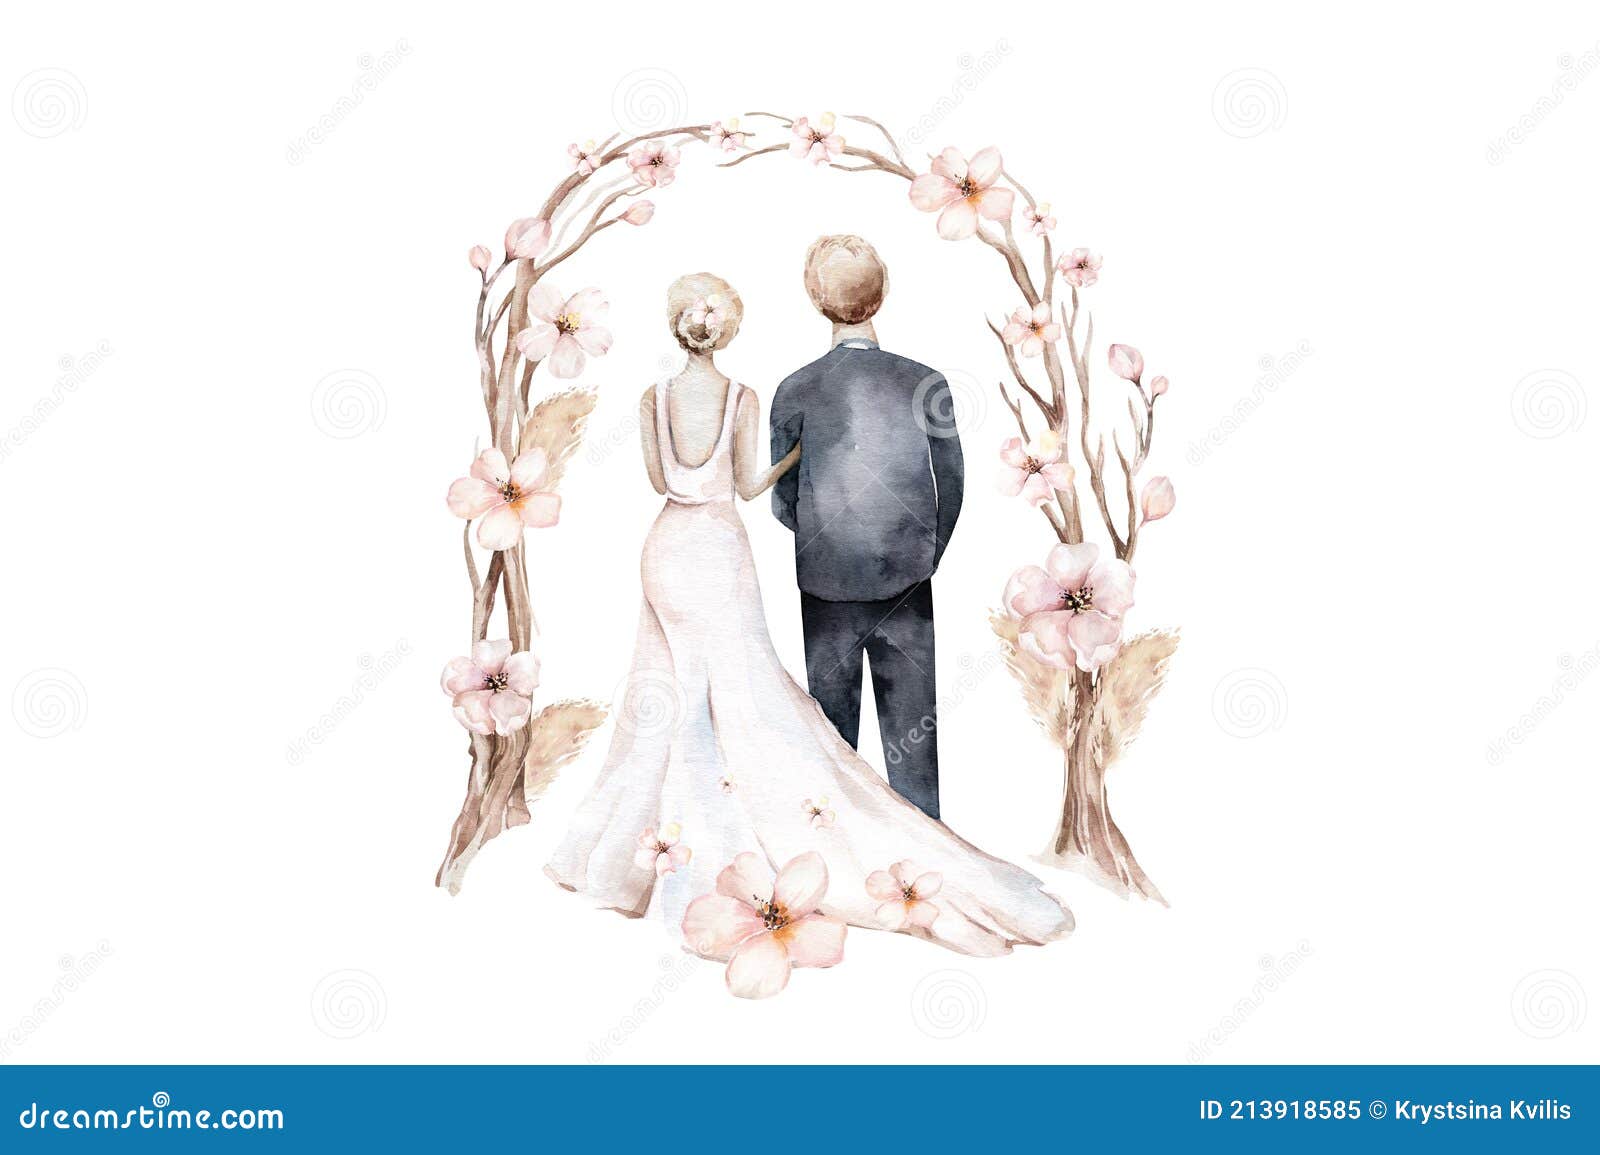 Watercolorcouple Bride And Groom In Boho Ceremony Style Wedding